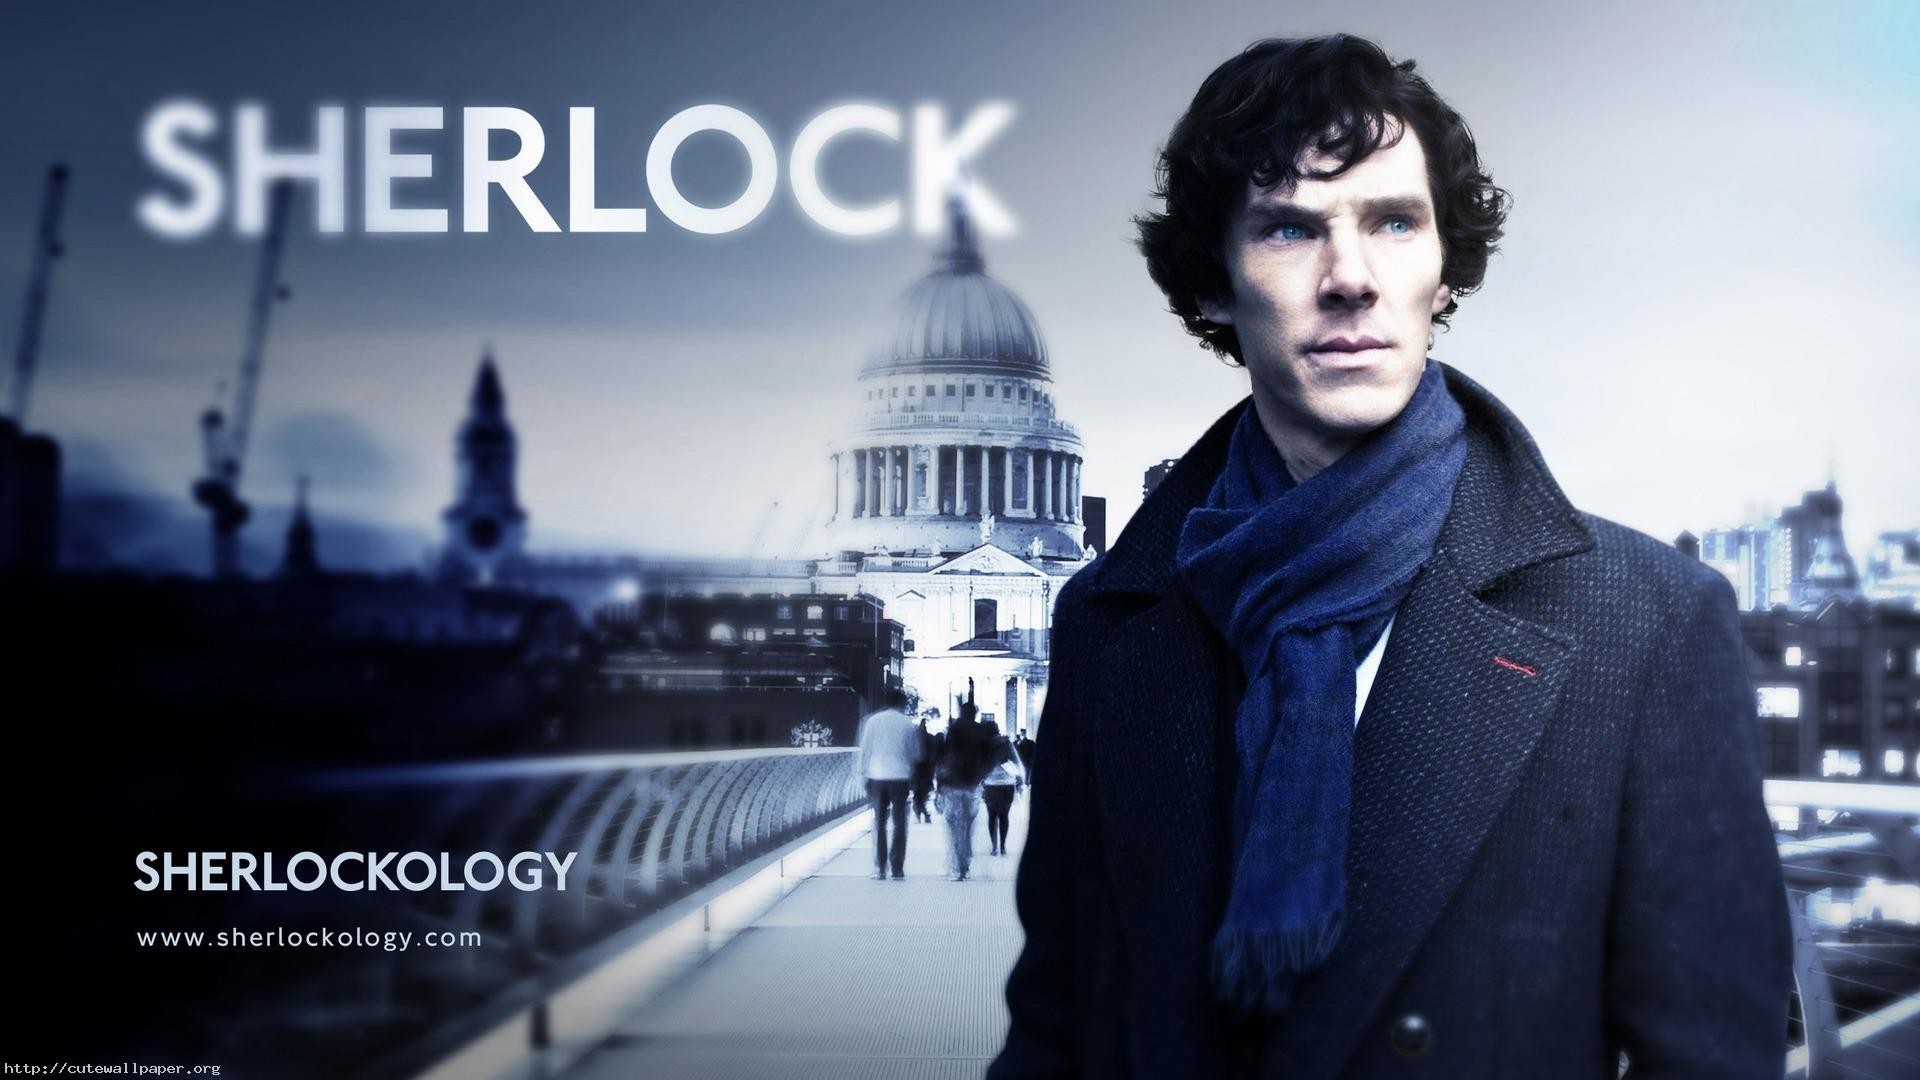 1920x1080  Sherlock Wallpapers HD, Desktop Backgrounds, Images and Pictures  1920Ã—1080 Sherlock Wallpapers